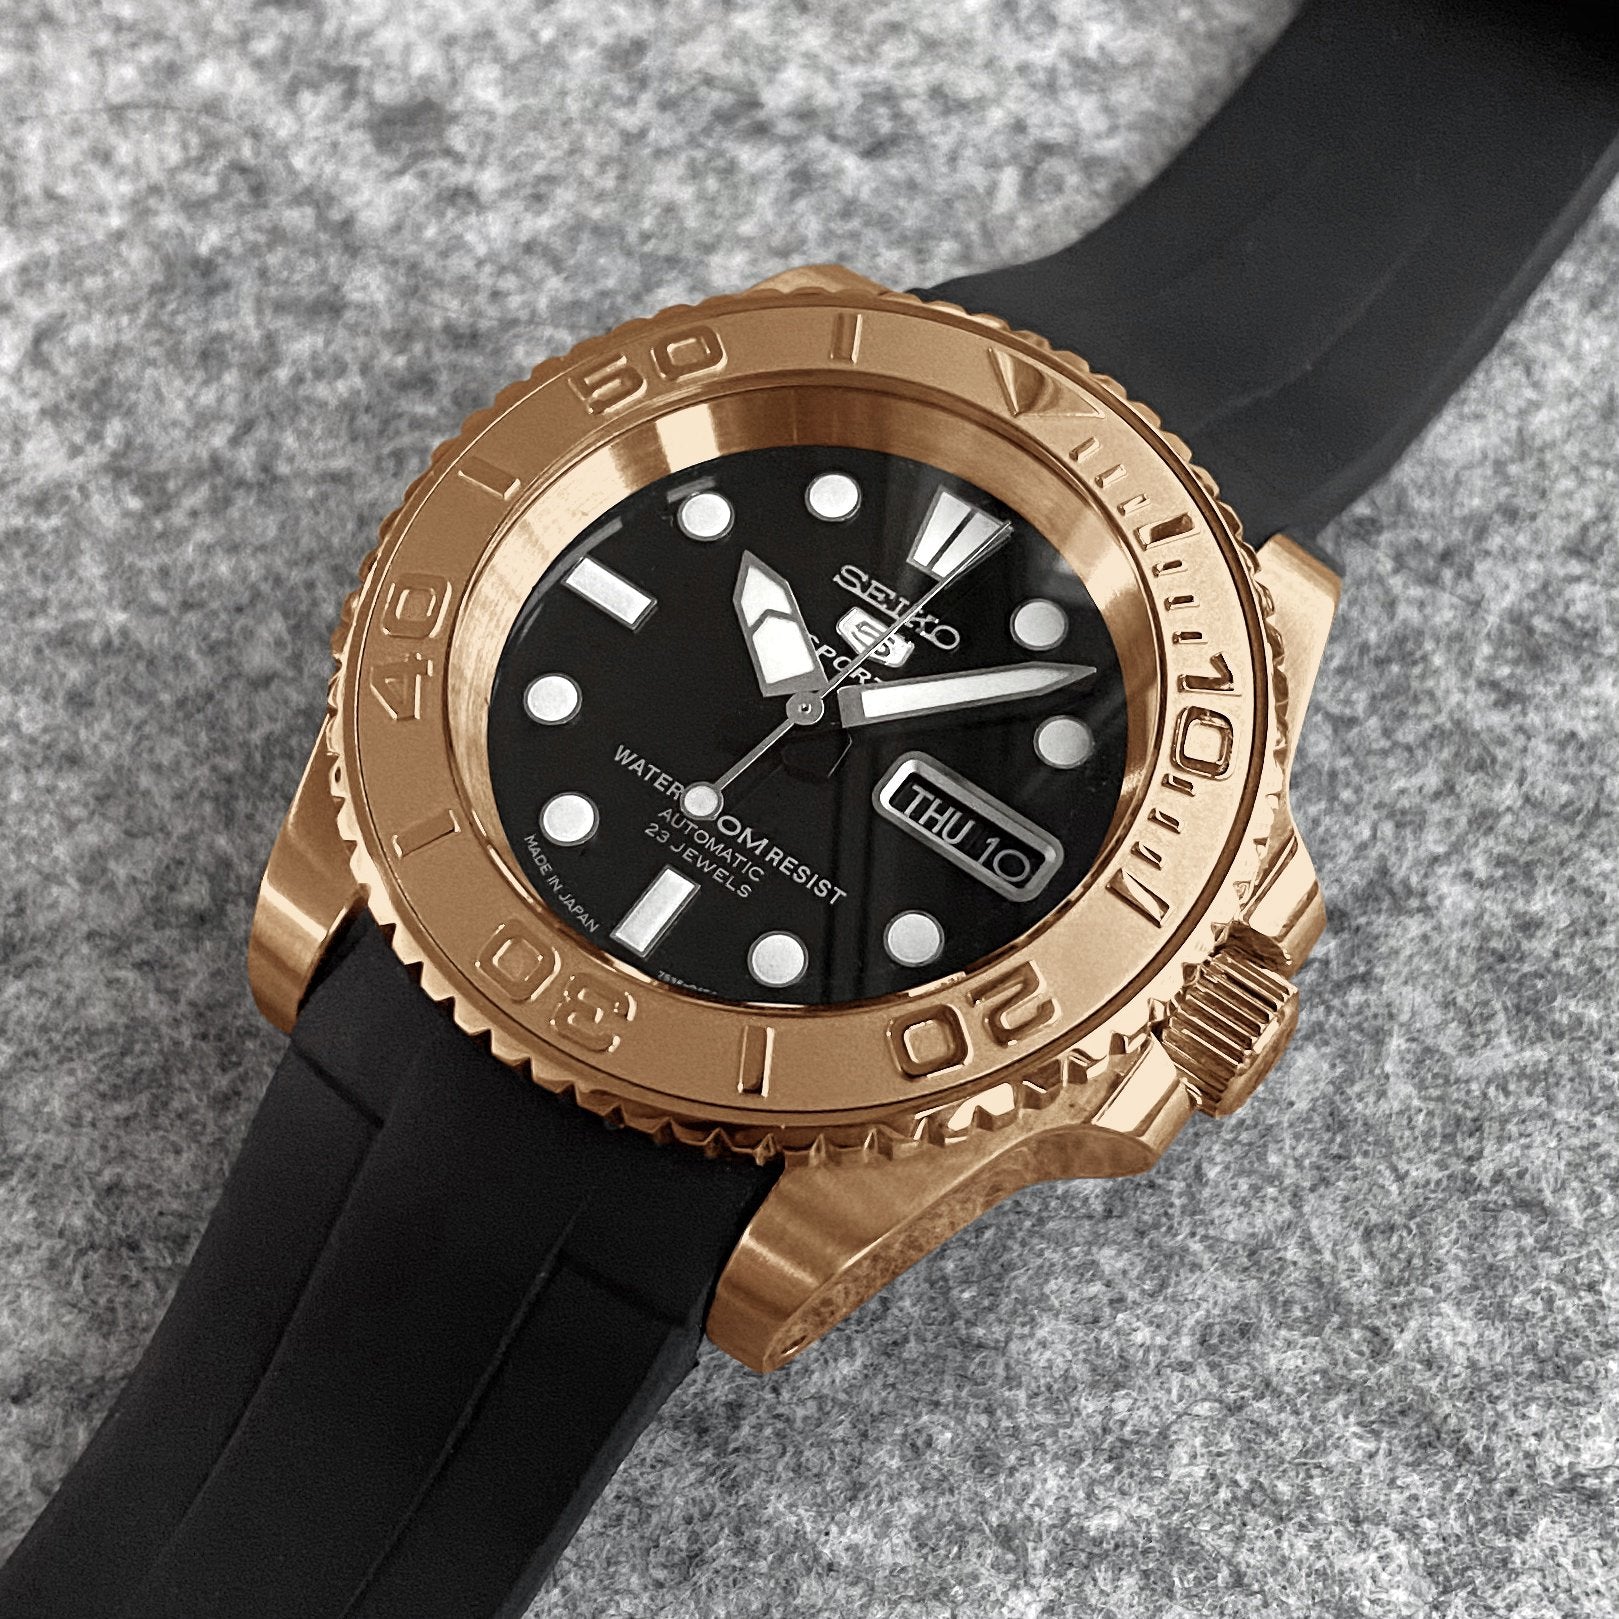 Case - SKX007 Sub - Polished PVD Rose Gold (With Case Back) - DLW WATCHES